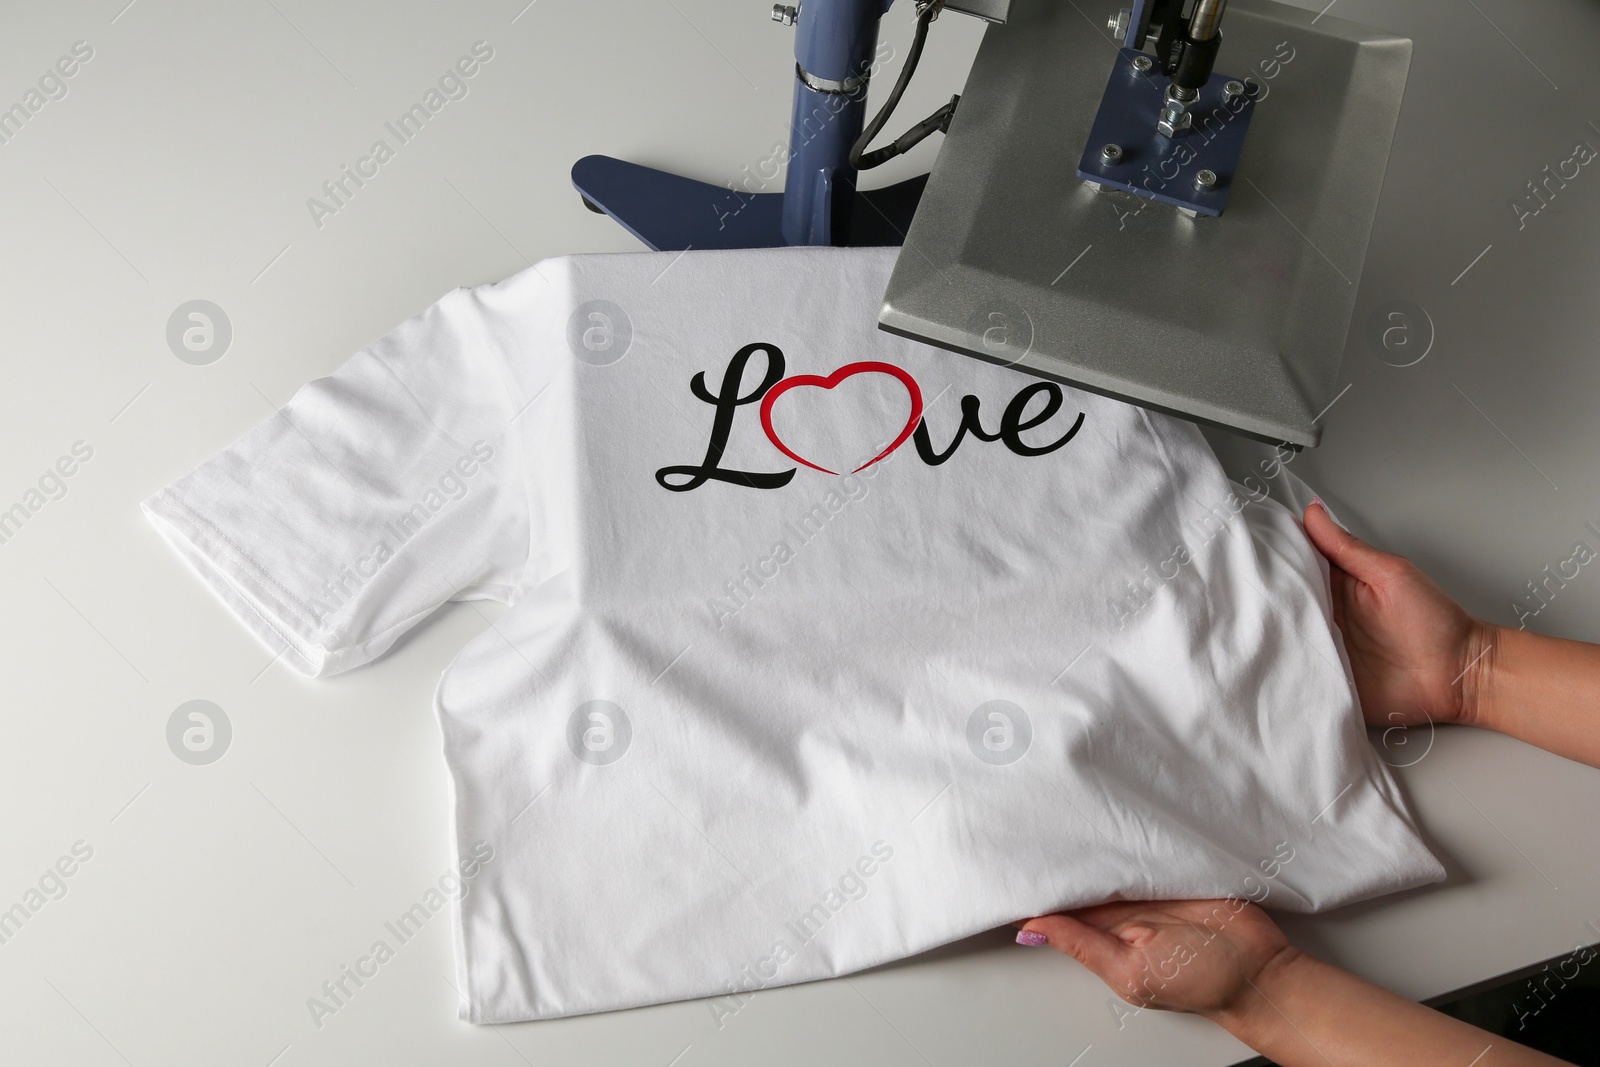 Photo of Printing logo. Woman with t-shirt using heat press at white table, above view